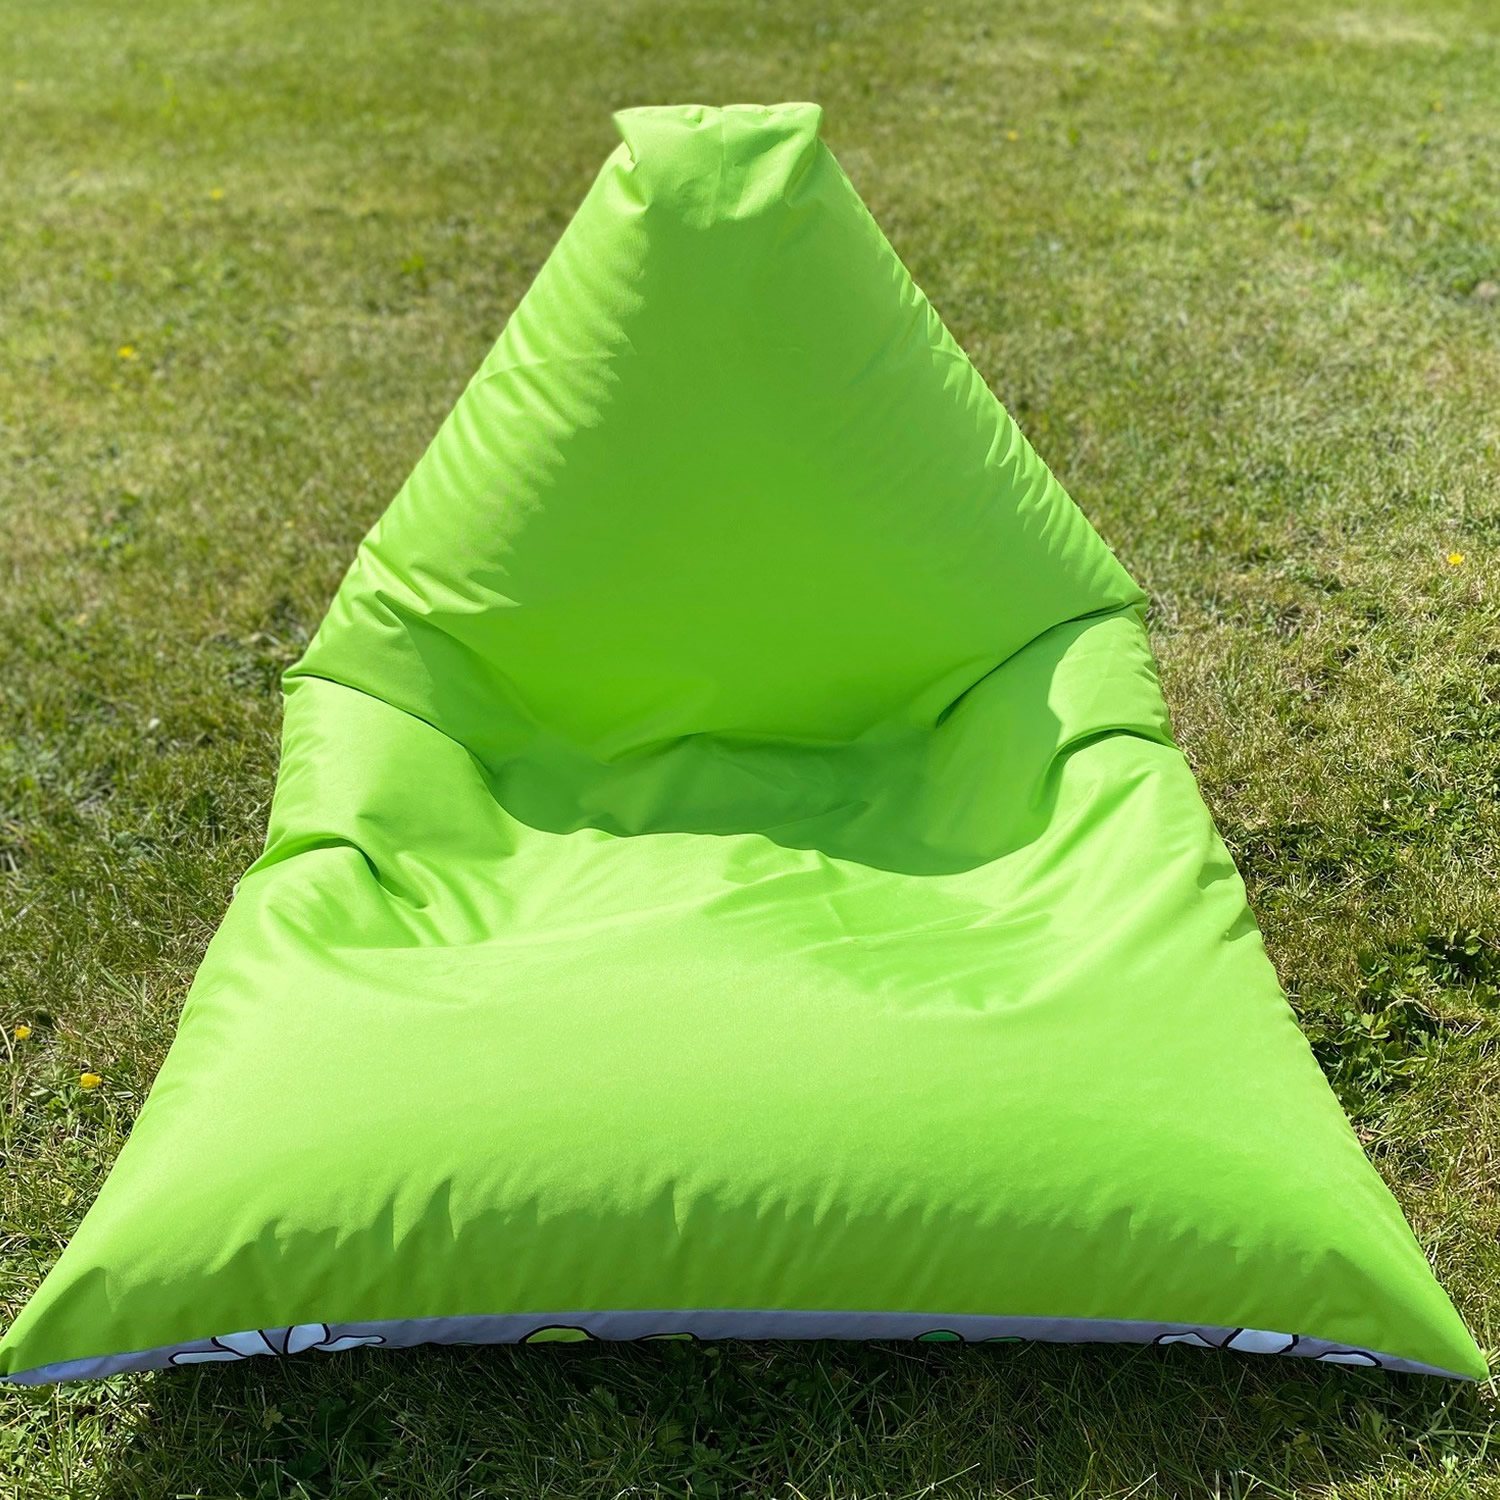 Flip and Sit Reversable Beanbags for indoors or outdoors